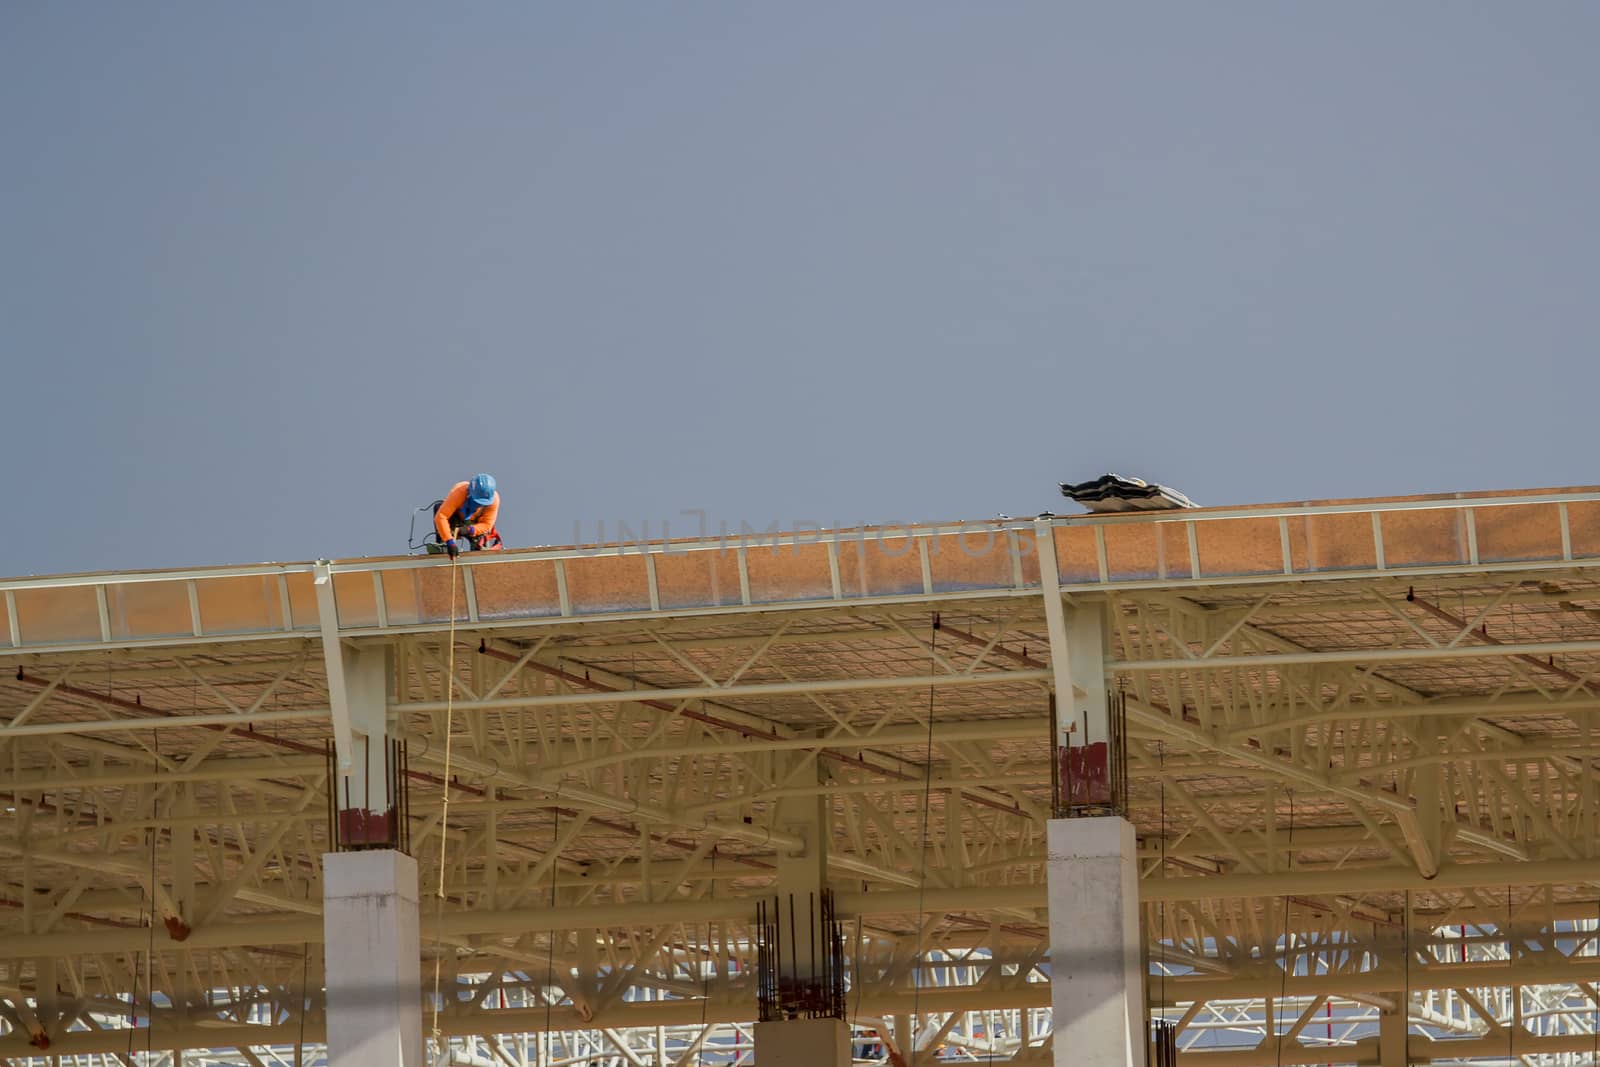 Construction workers on the roof of the building.